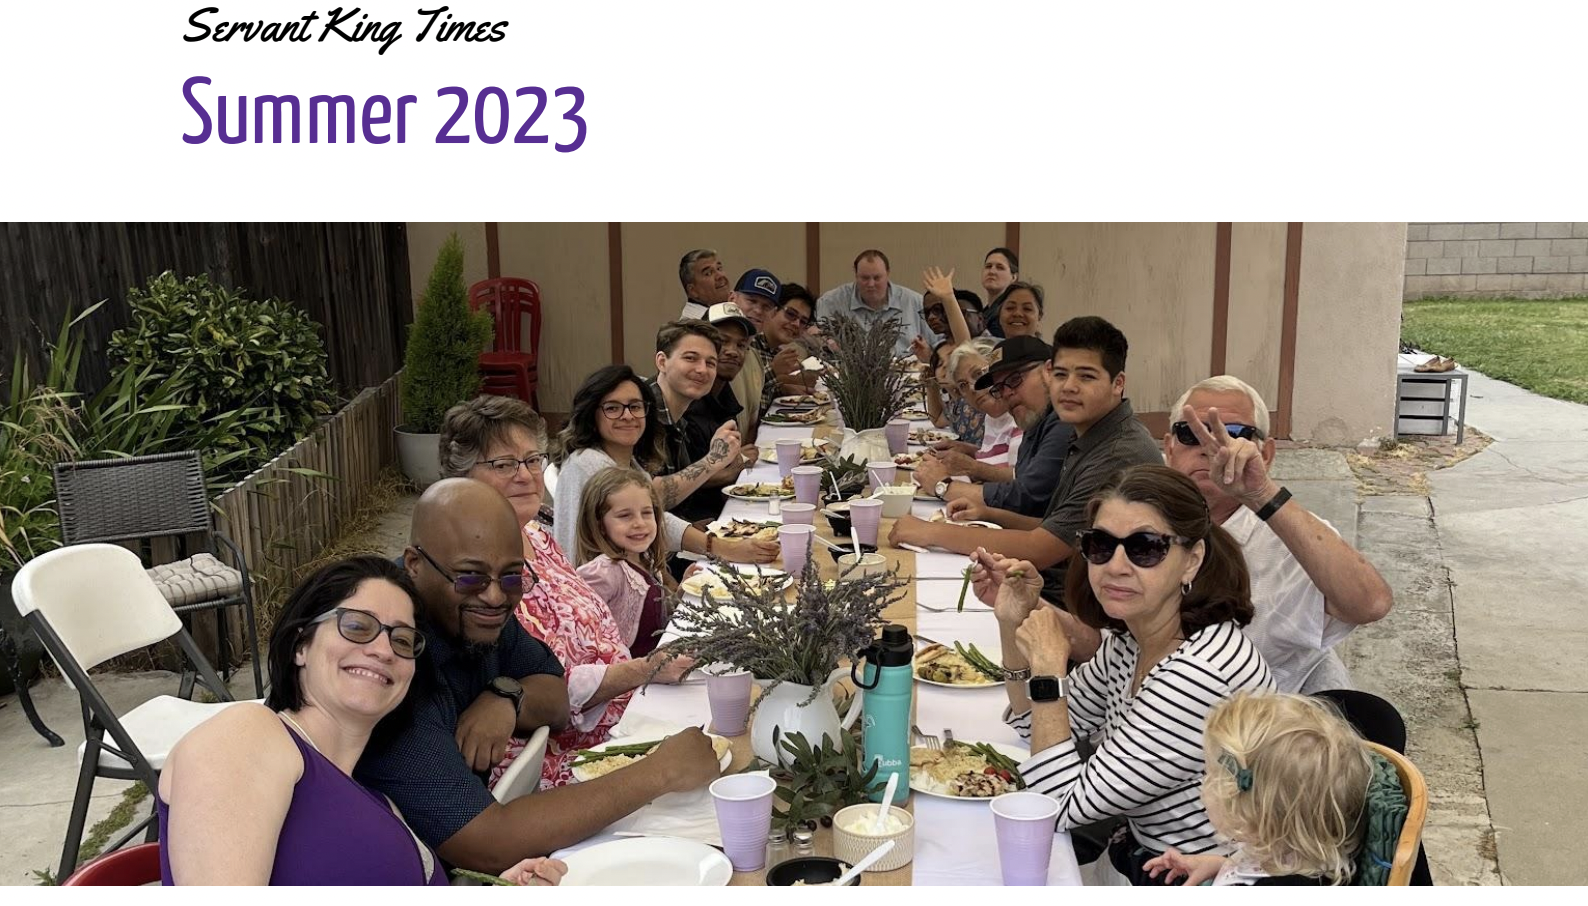 screenshot of newsletter showing Easter luncheon with guests at the table